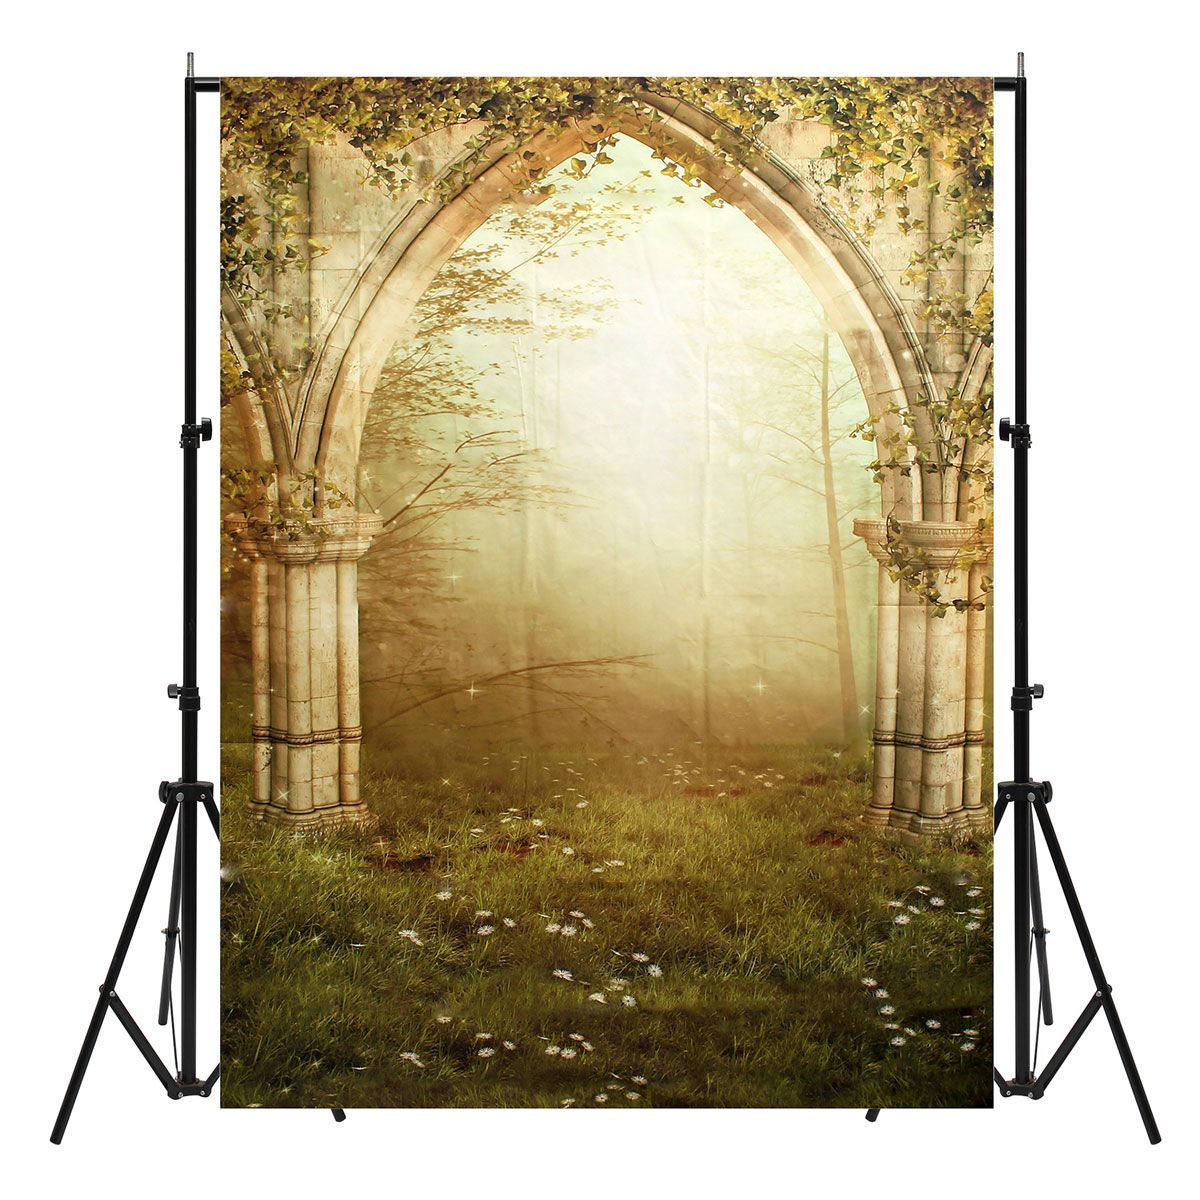 Vinyl-Forest-Realistic-Effect-Scenic-Photography-Backdrop-Studio-Prop-Photo-Background-1164072